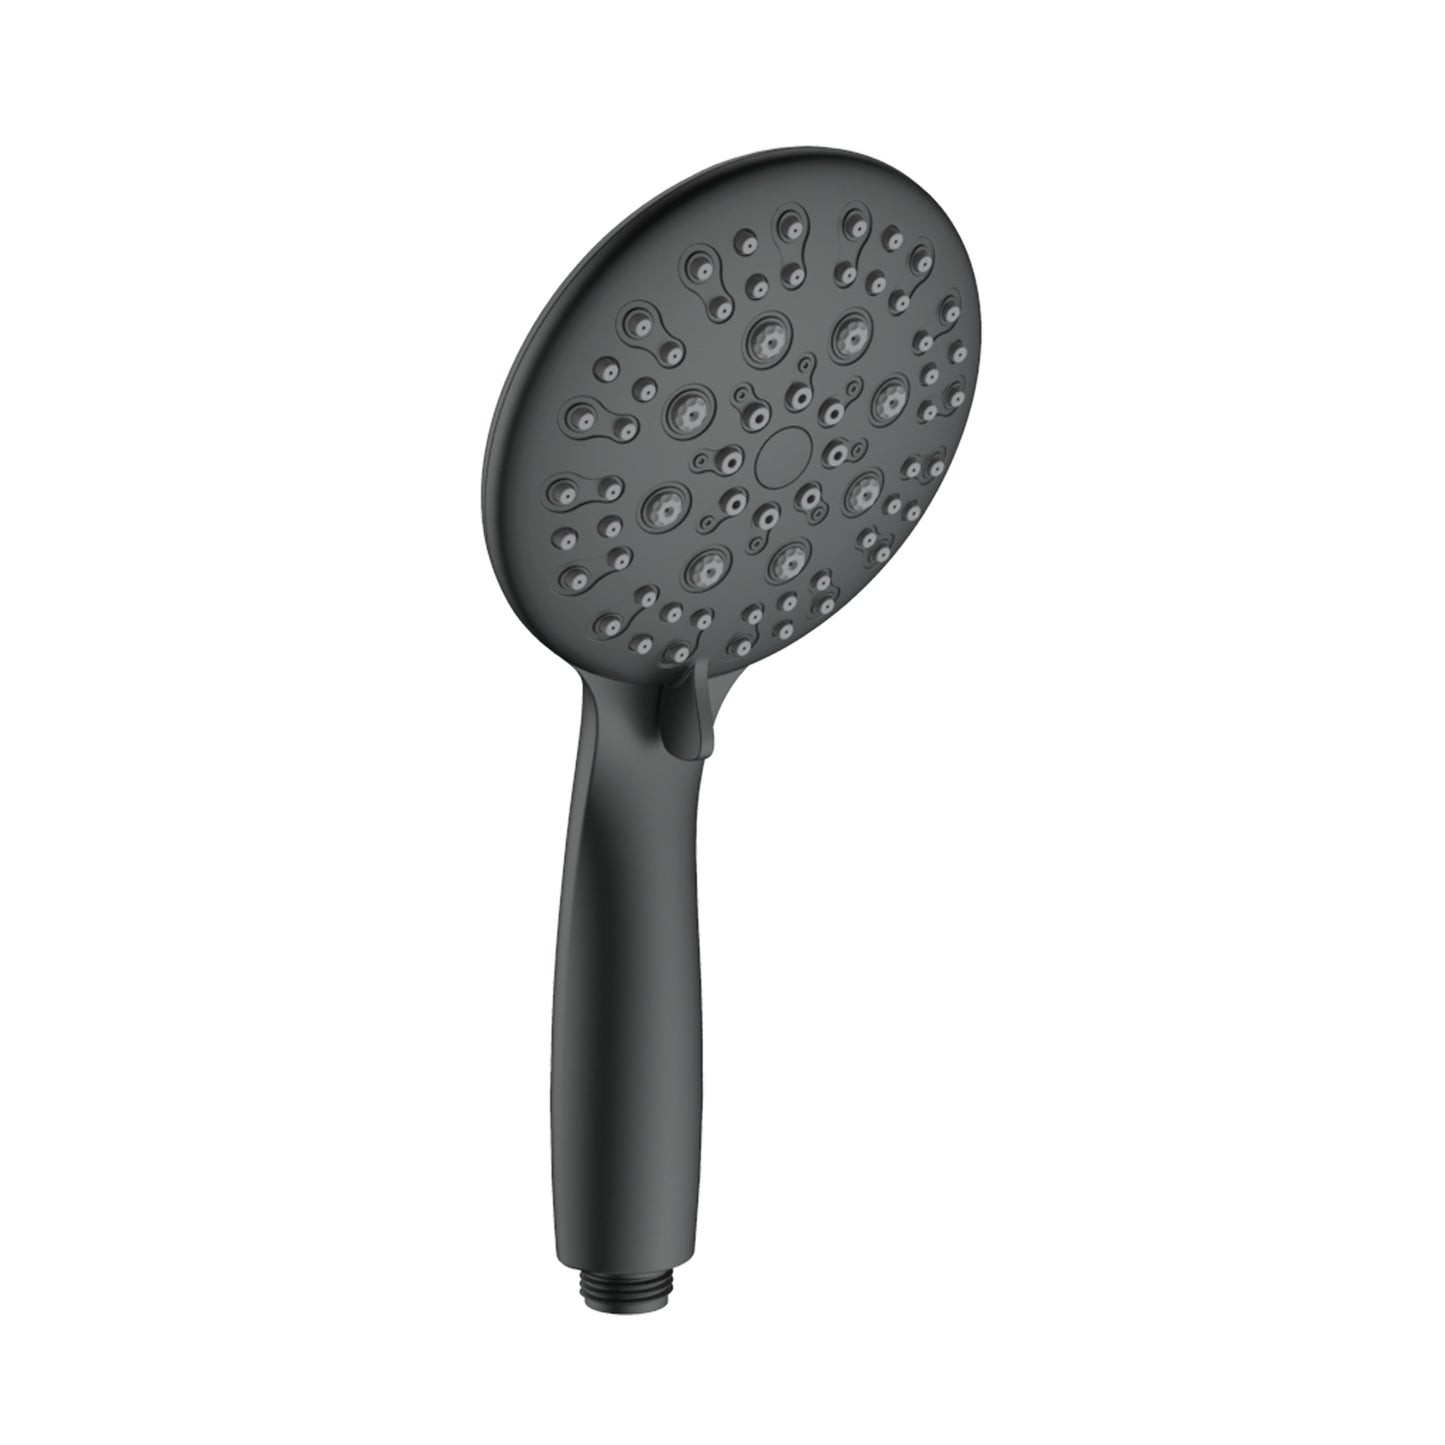 Large Amount of water Multi Function Shower Head - Shower System with 4." Rain Showerhead, 6-Function Hand Shower, Simple Style, Matte Black